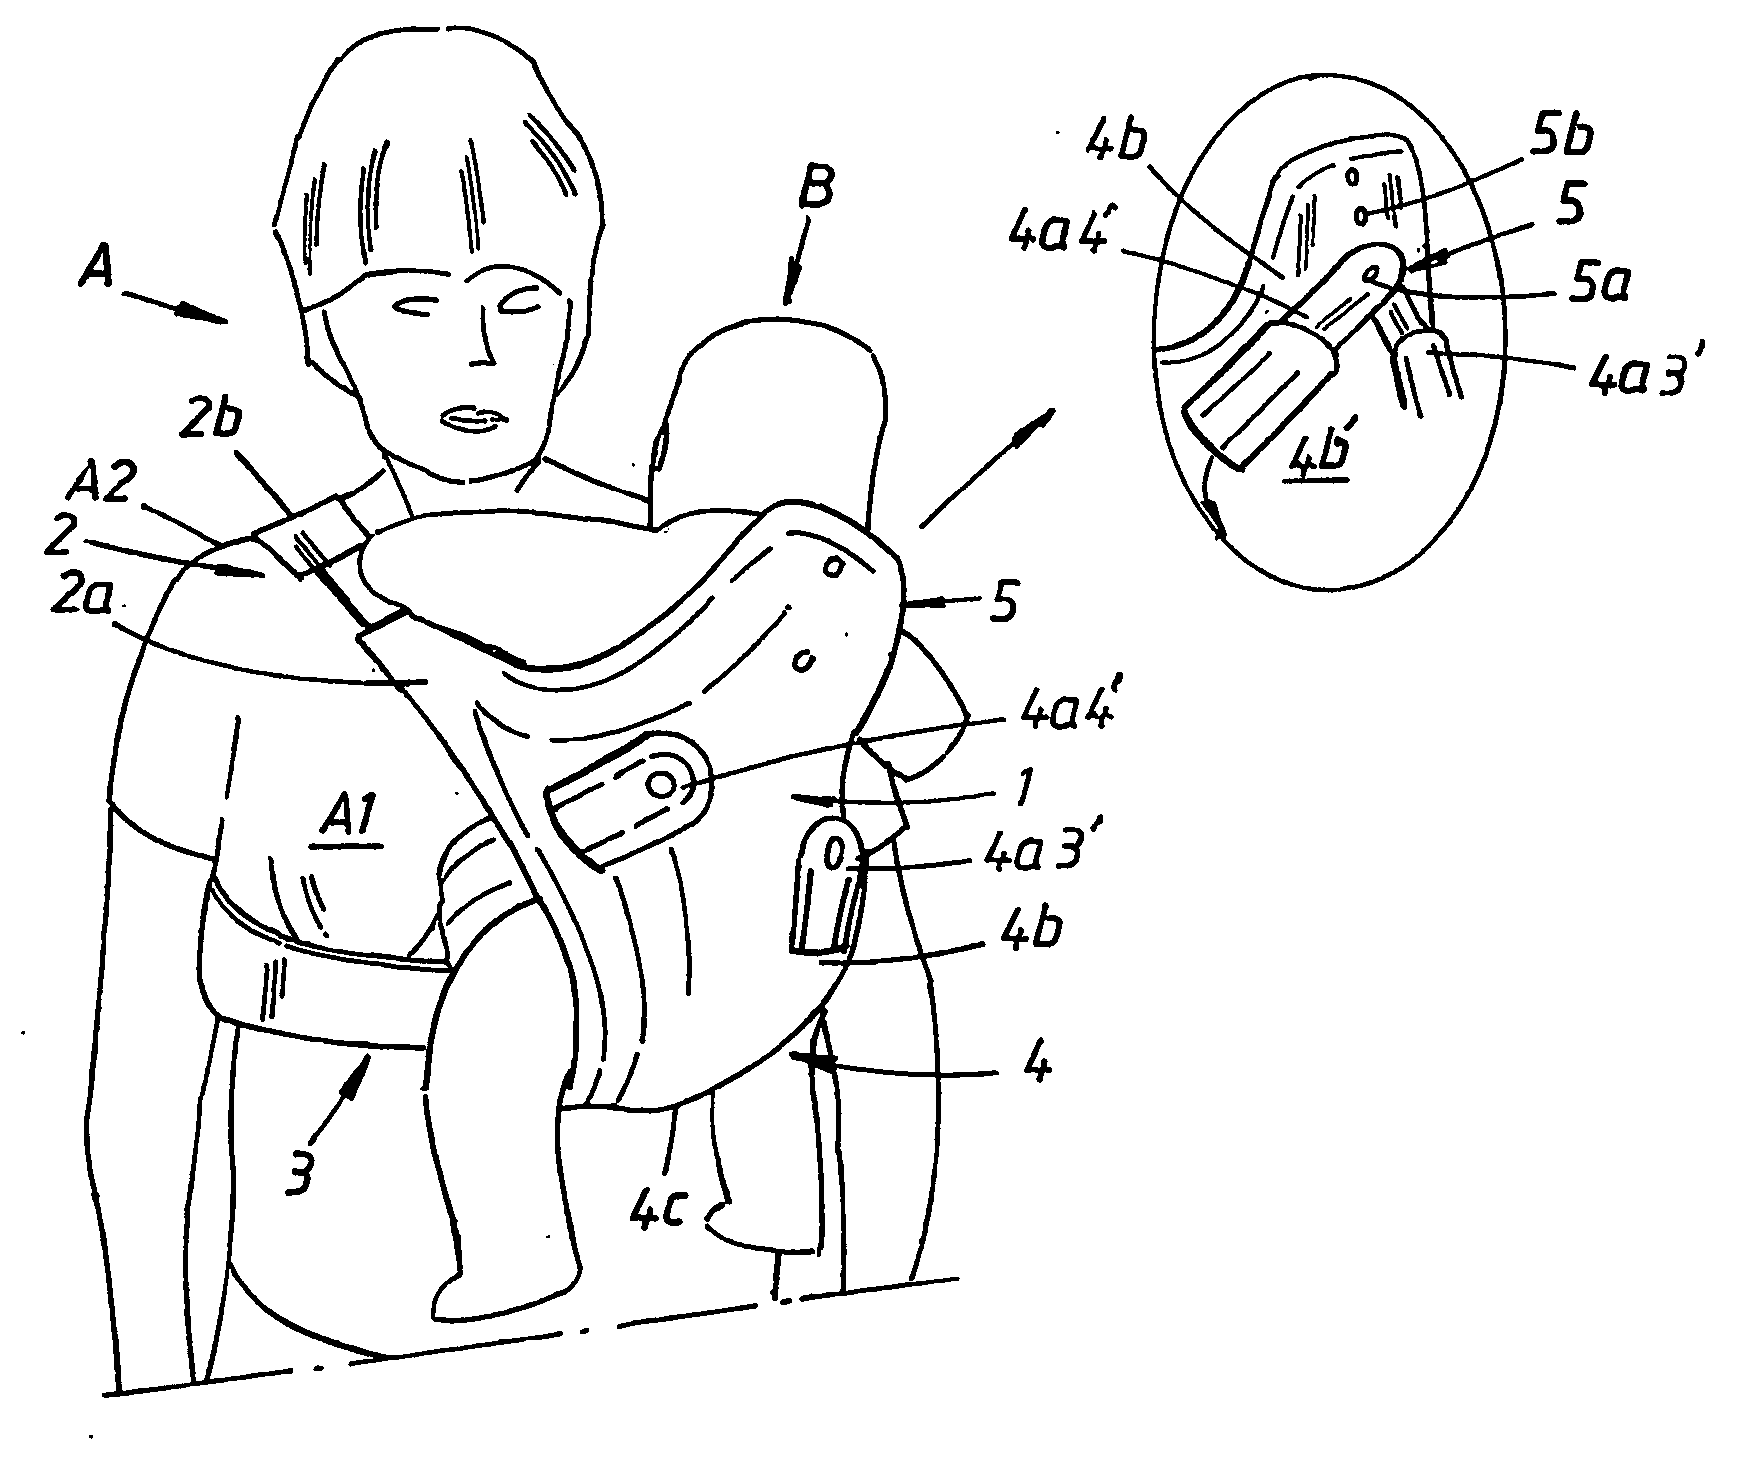 Harness for carrying